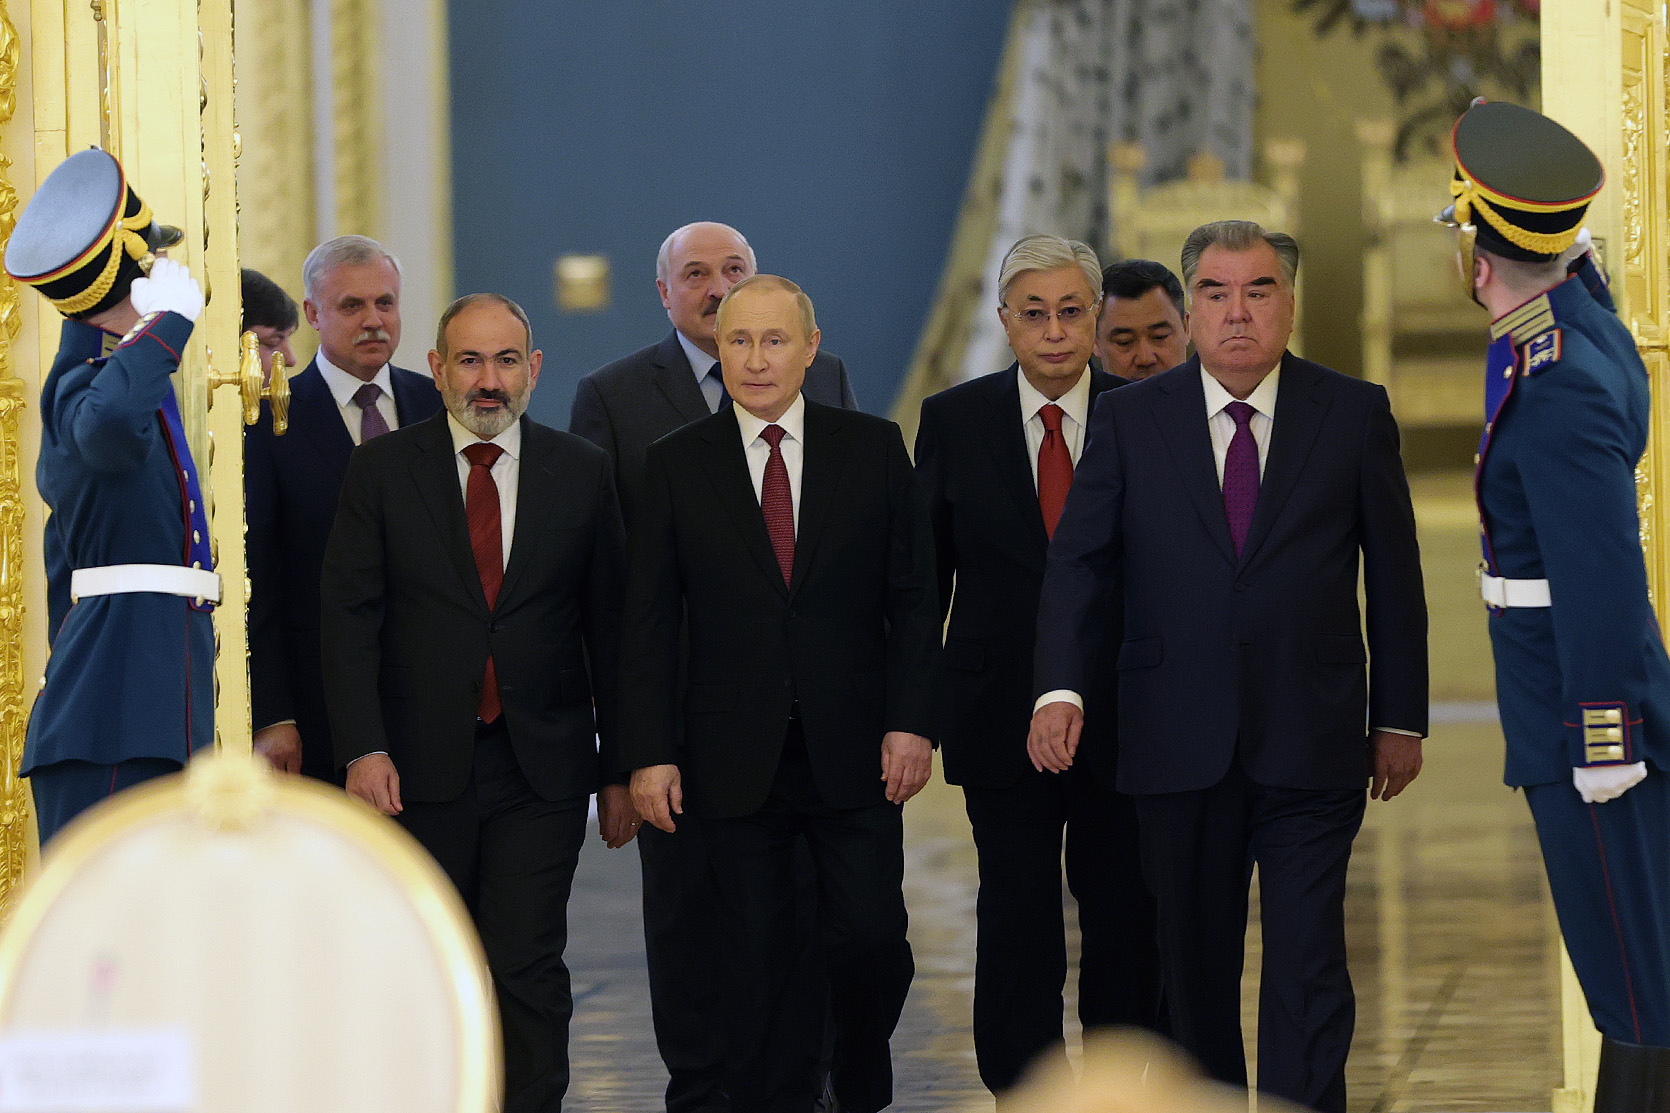 Pashinyan, other regional leaders reiterate commitment to military alliance at Moscow summit